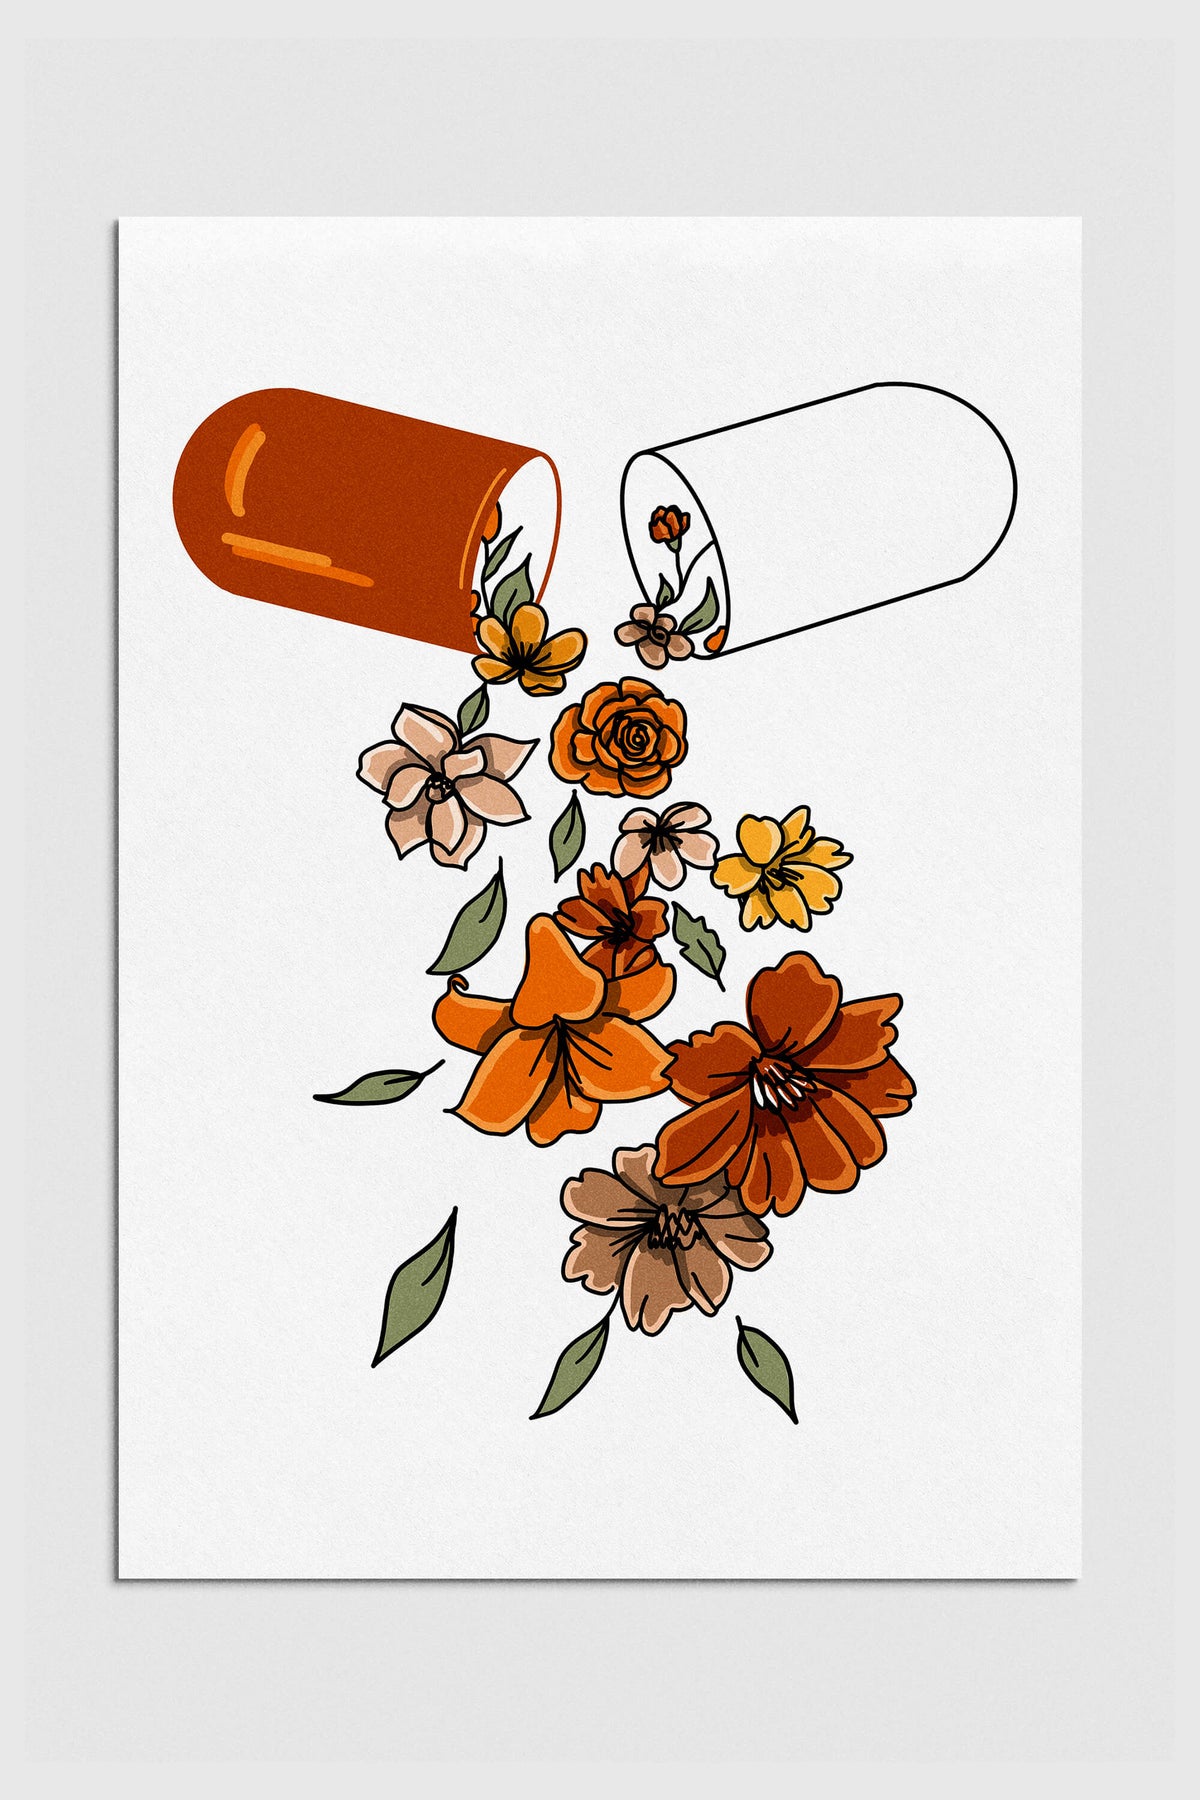 Floral Pill Art Print as a unique graduation gift for new pharmacists, with vibrant botanical motifs.